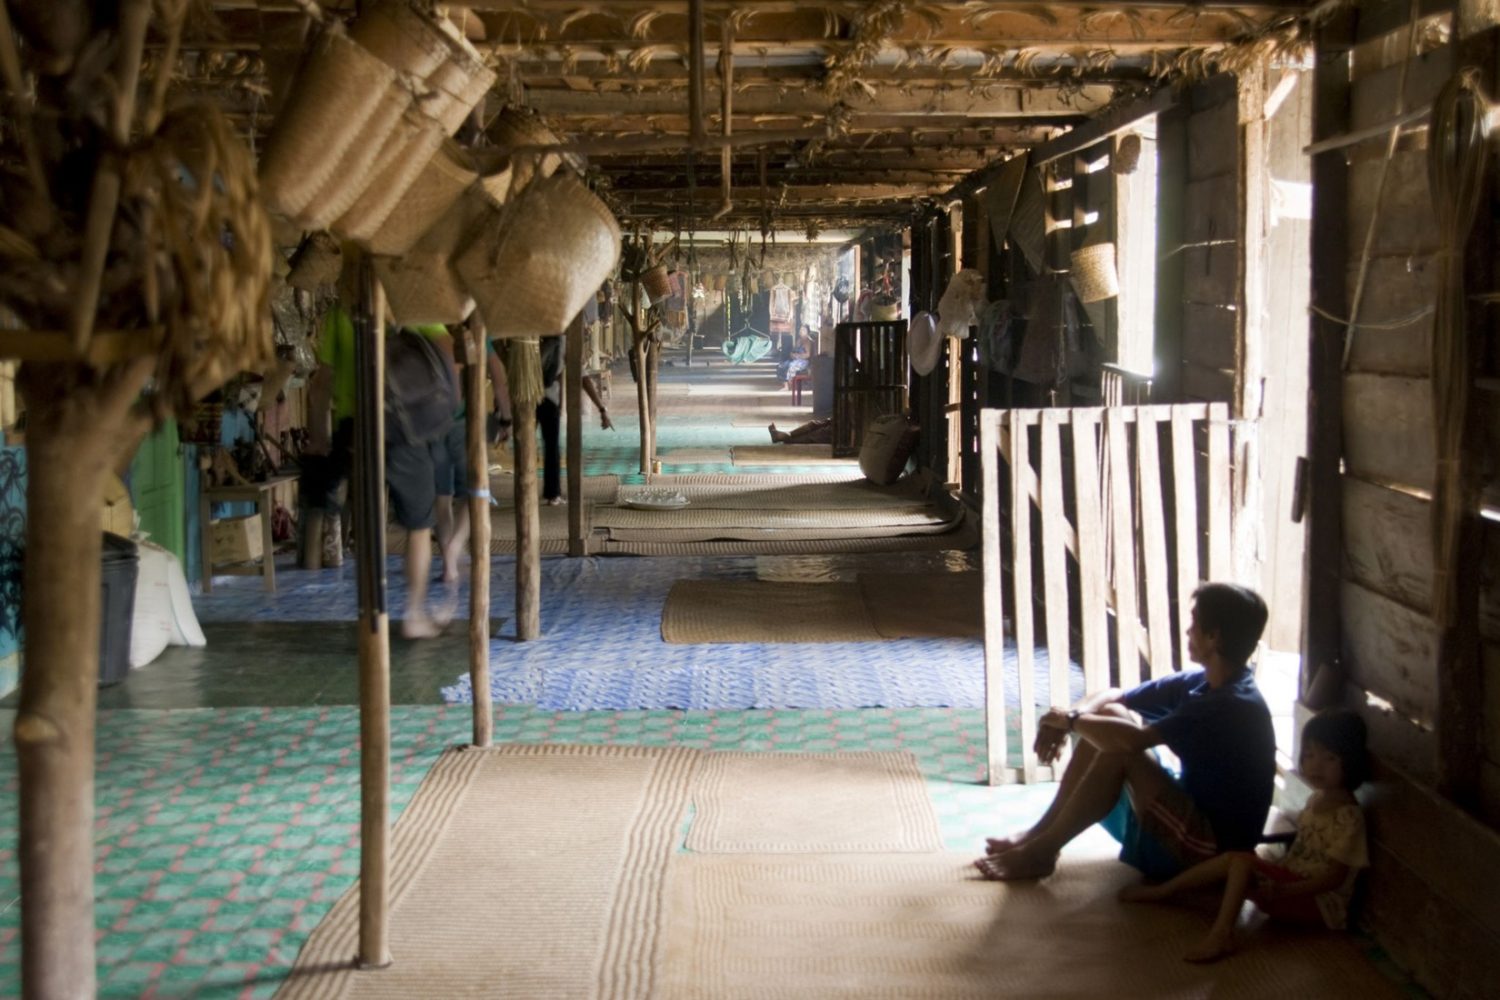 A ruai is a long communal space in a traditional longhouse. Pic: Robas